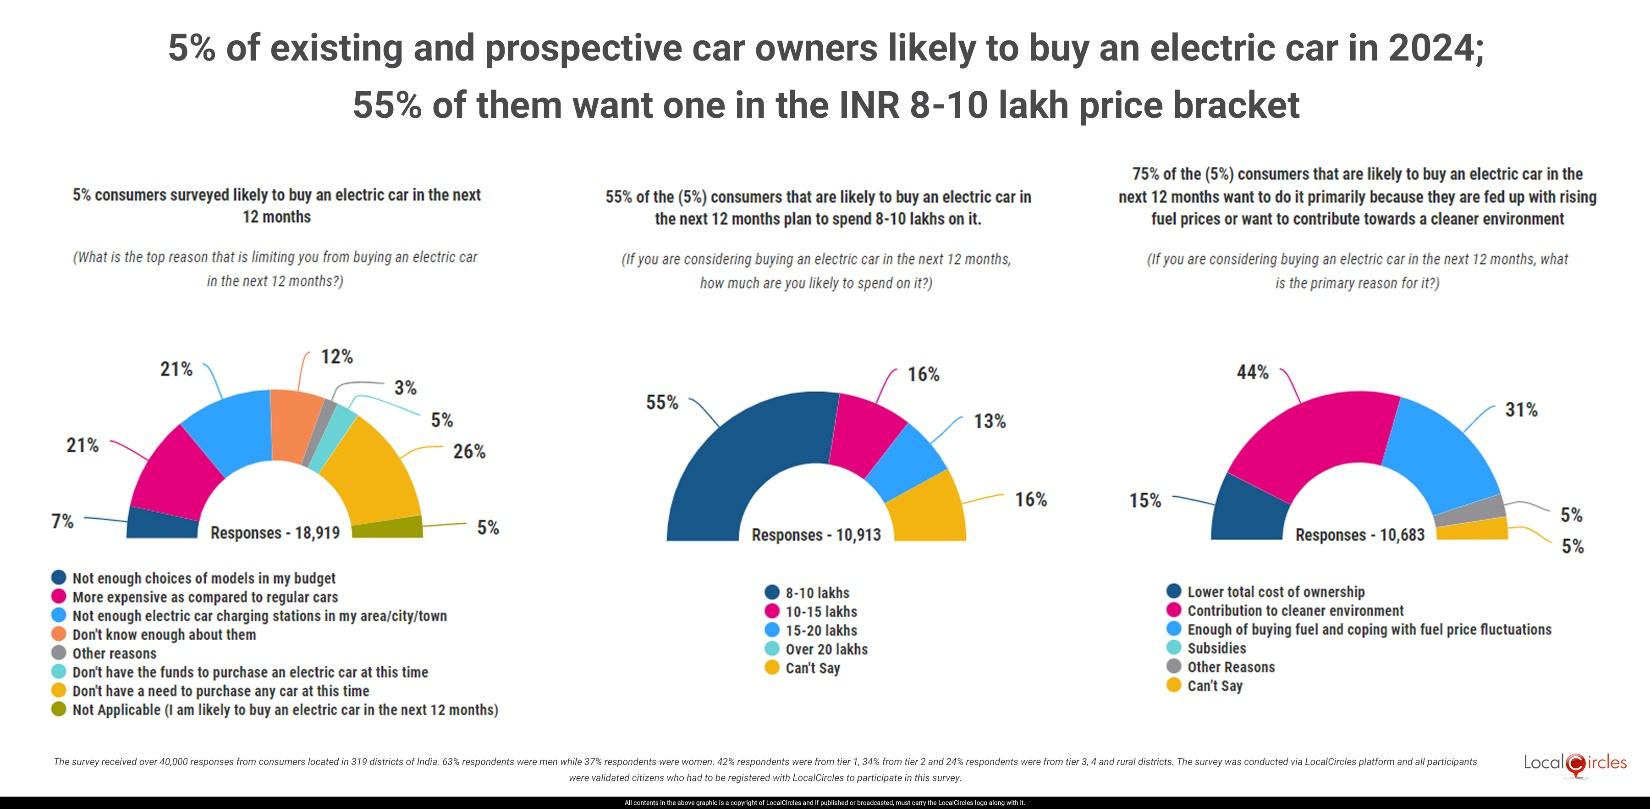 5% of existing and prospective car owners likely to buy an electric car in 2024; 55% of such buyers want one in the INR 8-10 lakh price bracket